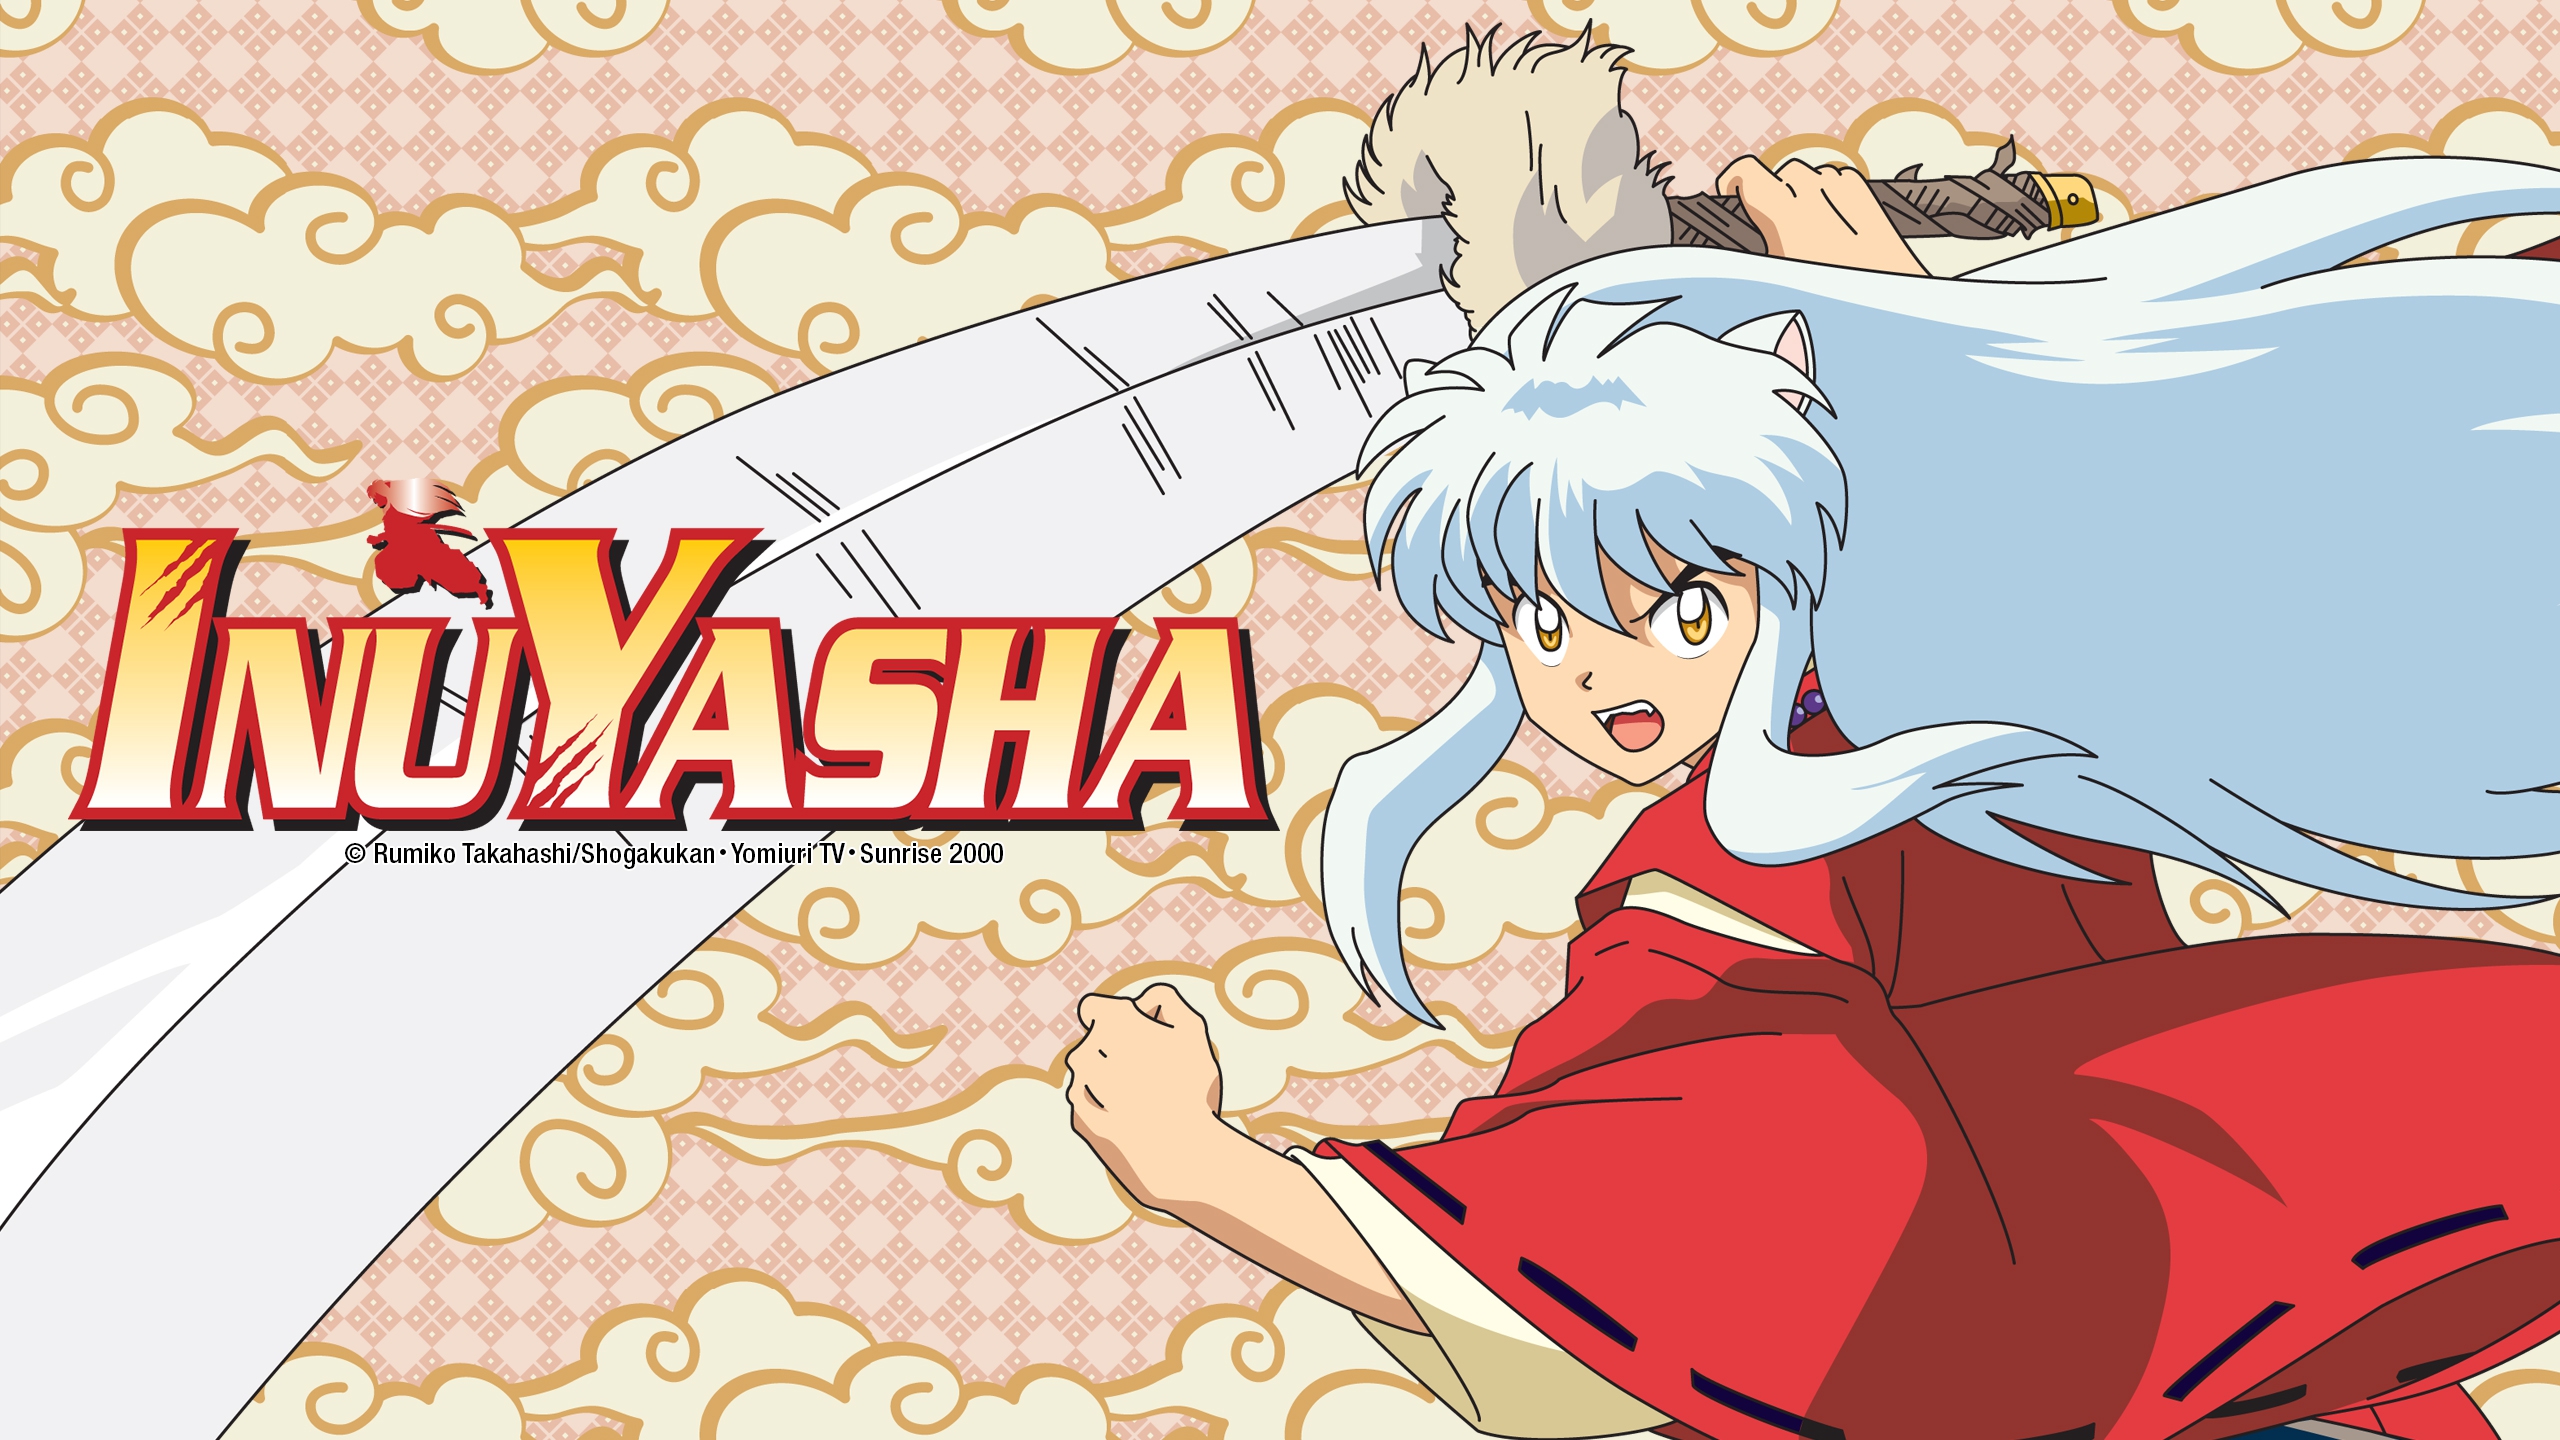 Inuyasha Season 2 Episodes Streaming Online for Free The Roku Channel Roku.